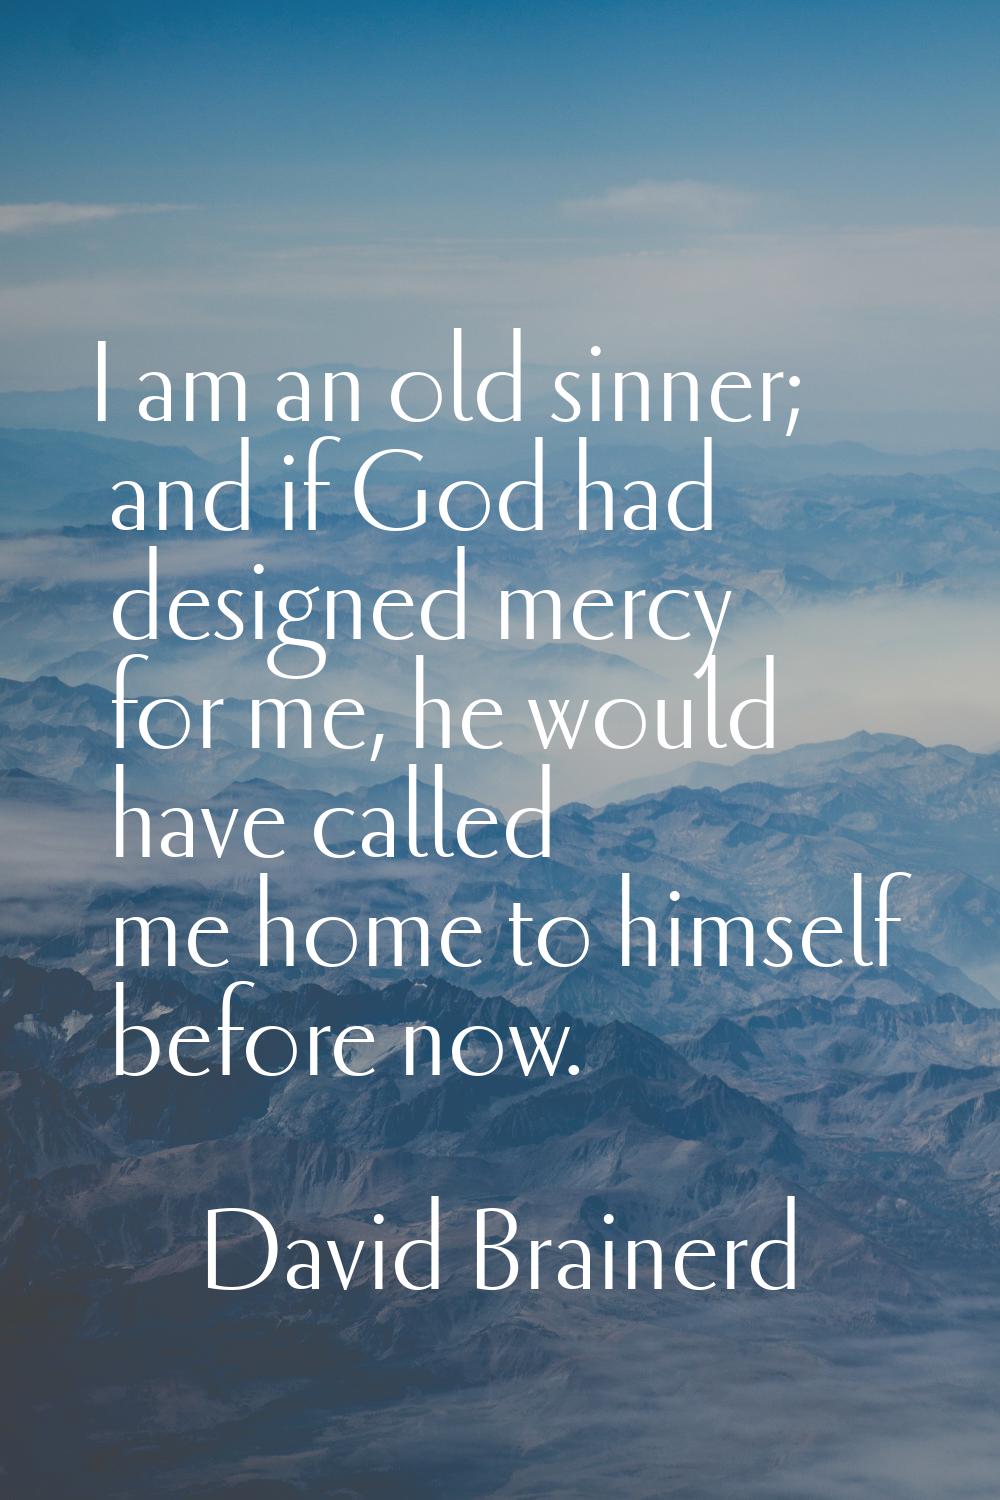 I am an old sinner; and if God had designed mercy for me, he would have called me home to himself b